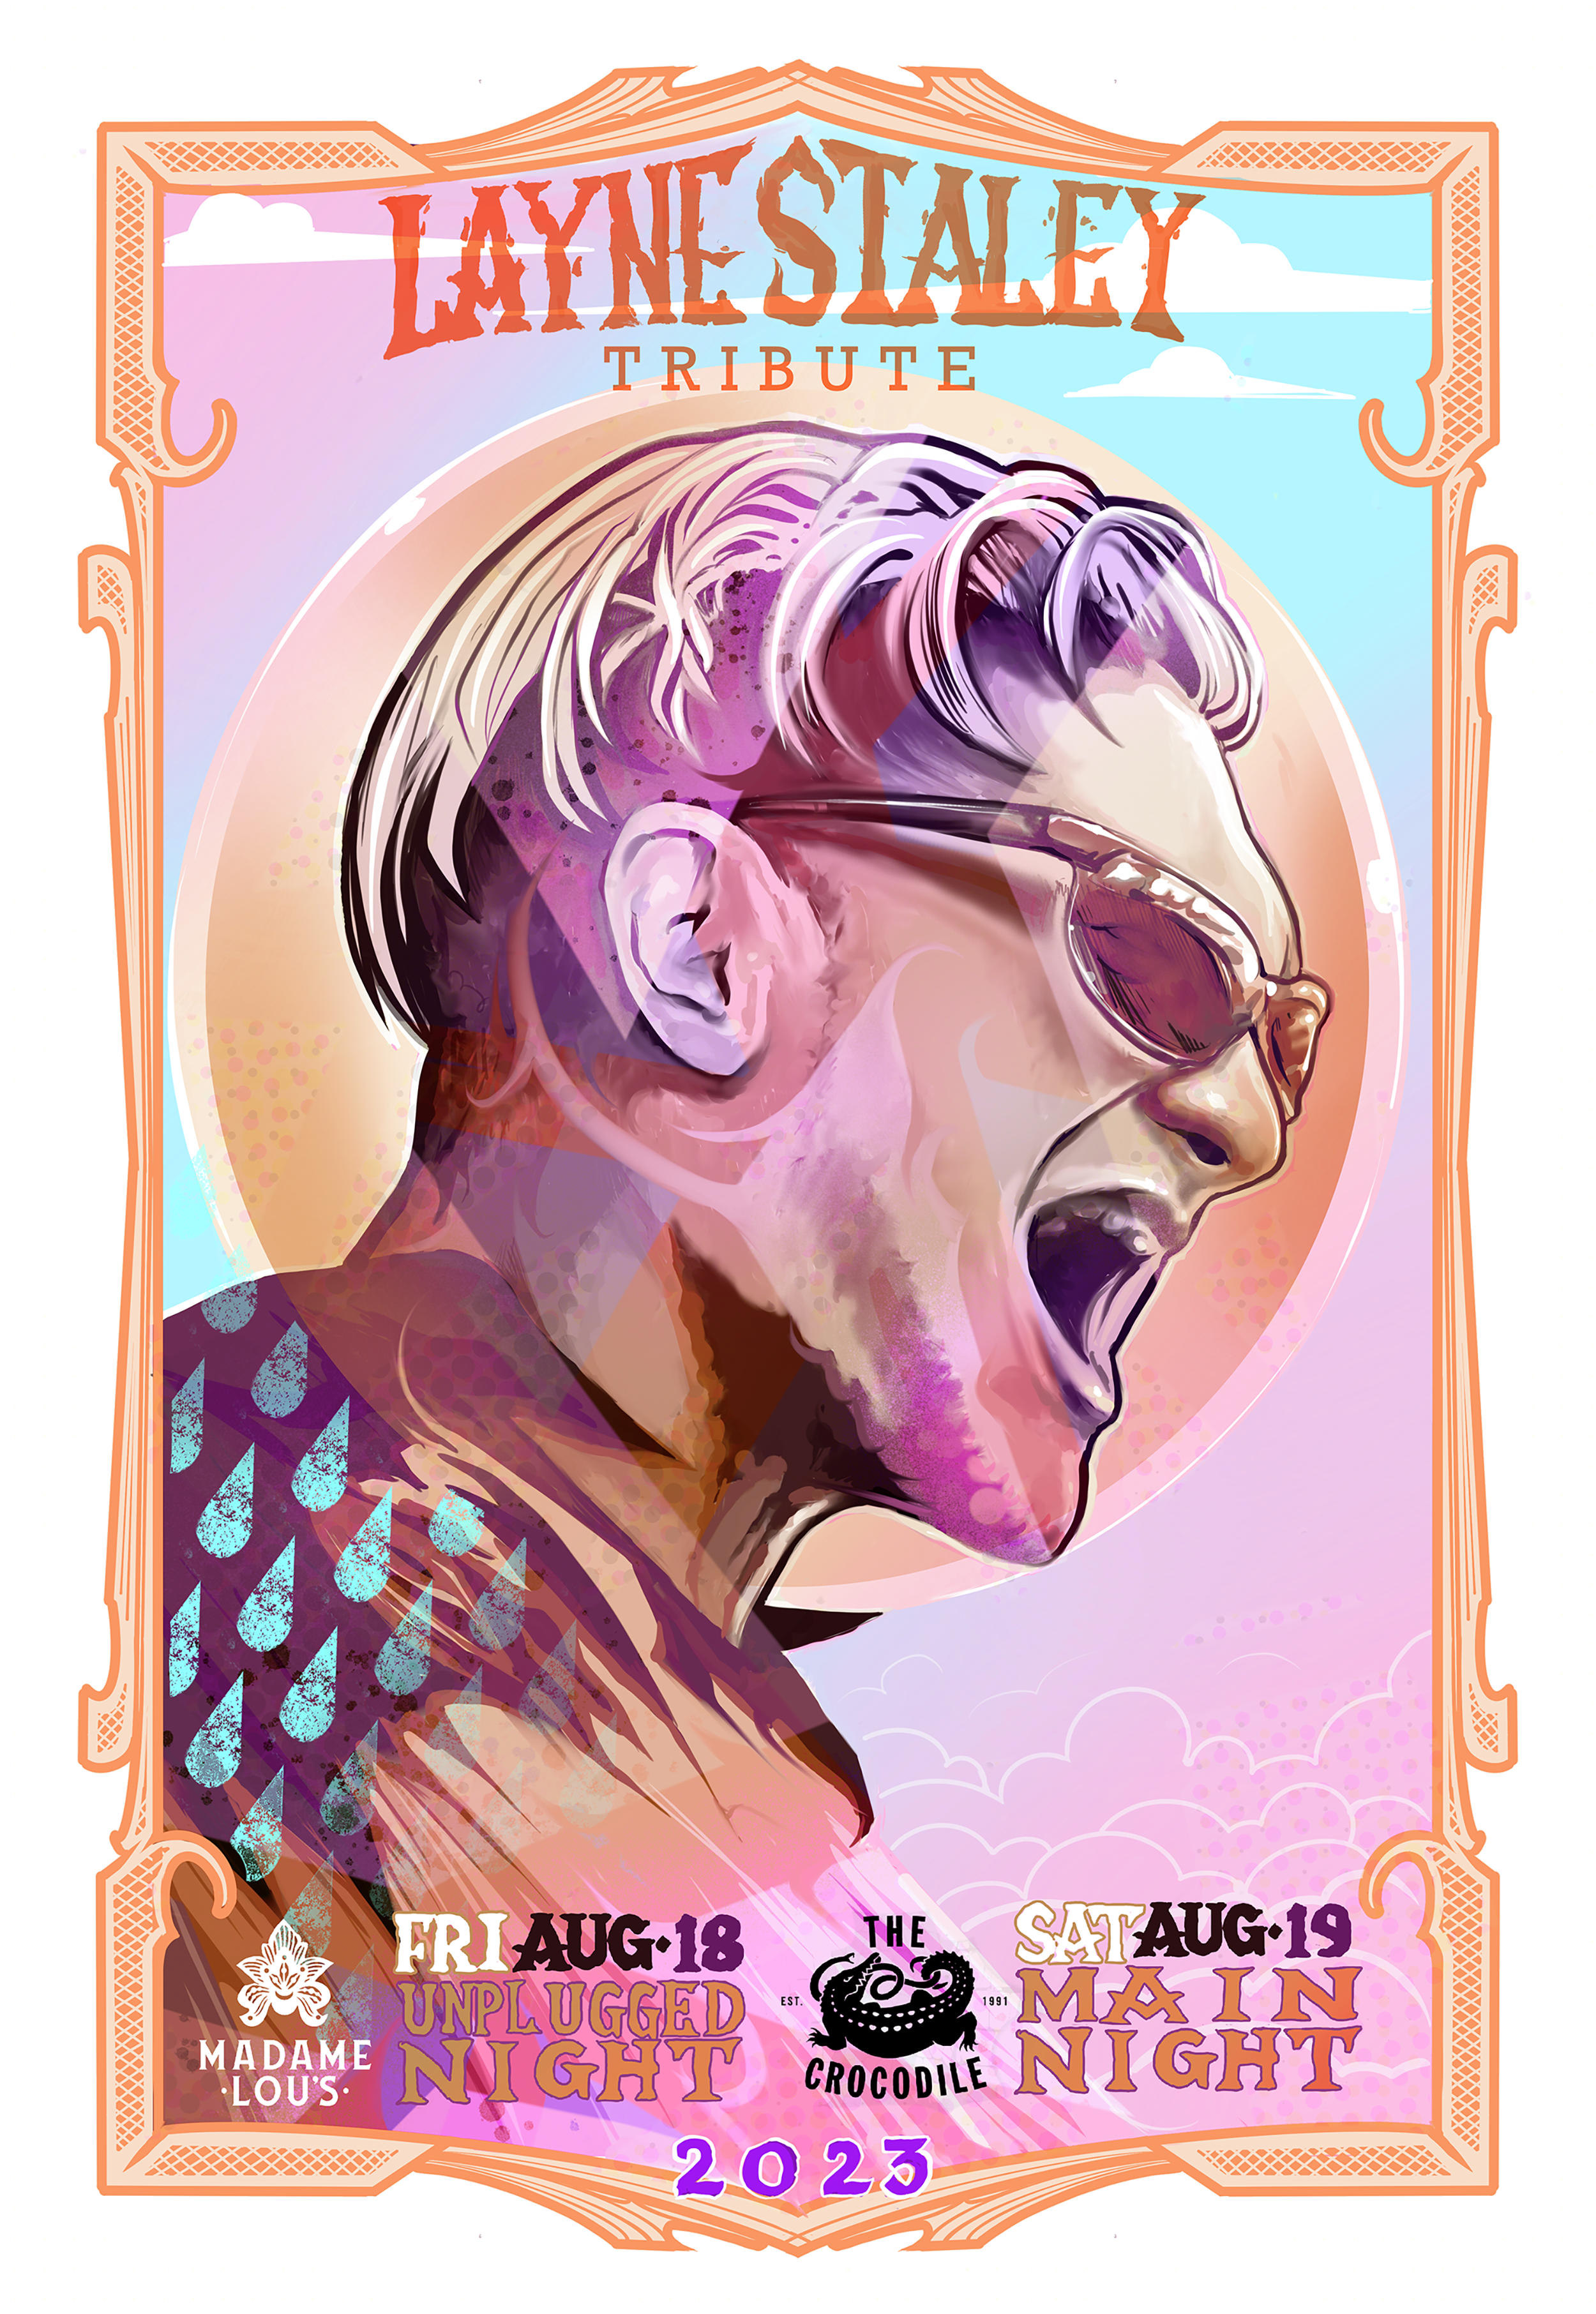 A poster for a Layne Staley Tribute concert featuring a man in sunglasses.